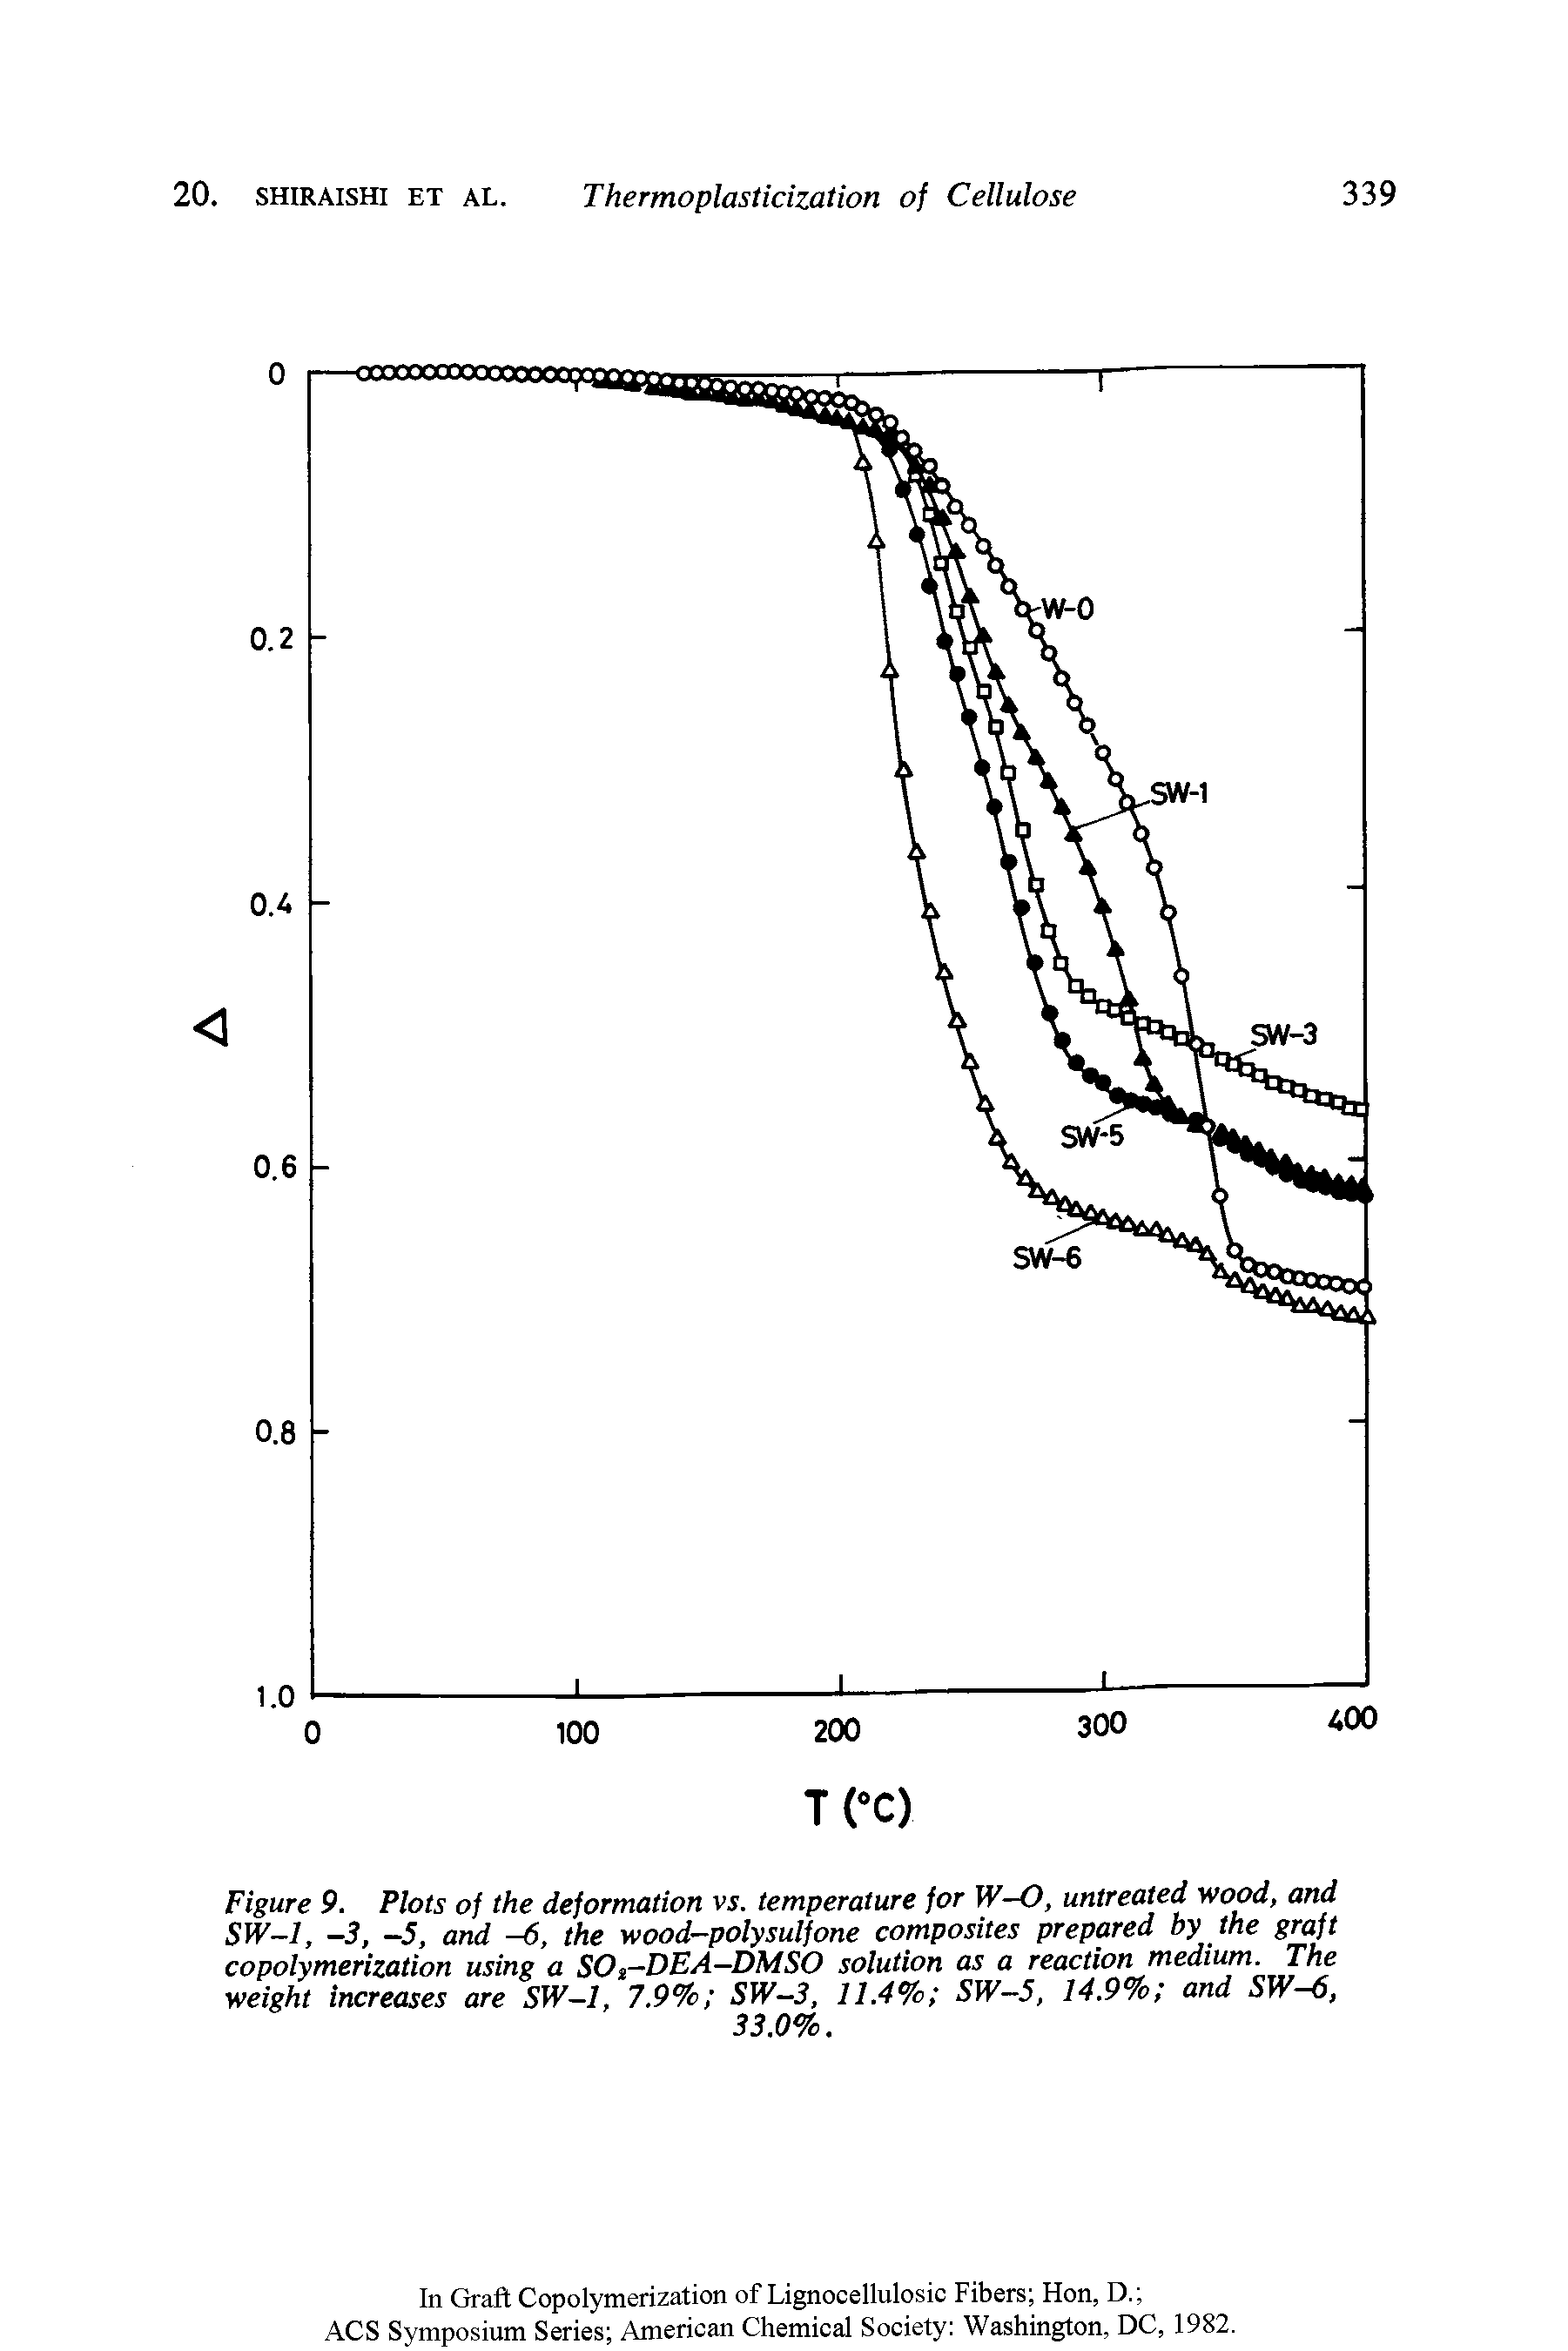 Figure 9. Plots of the deformation vs. temperature for W-O, untreated wood, and SW—1, -3, —5, and -6, the wood-polysulfone composites prepared by the graft copolymerization using a SO3-DEA-DMSO solution as a reaction medium. The weight increases are SW-1, 7.9% SW-3, 11.4% SW-5, 14.9% and SW-6,...